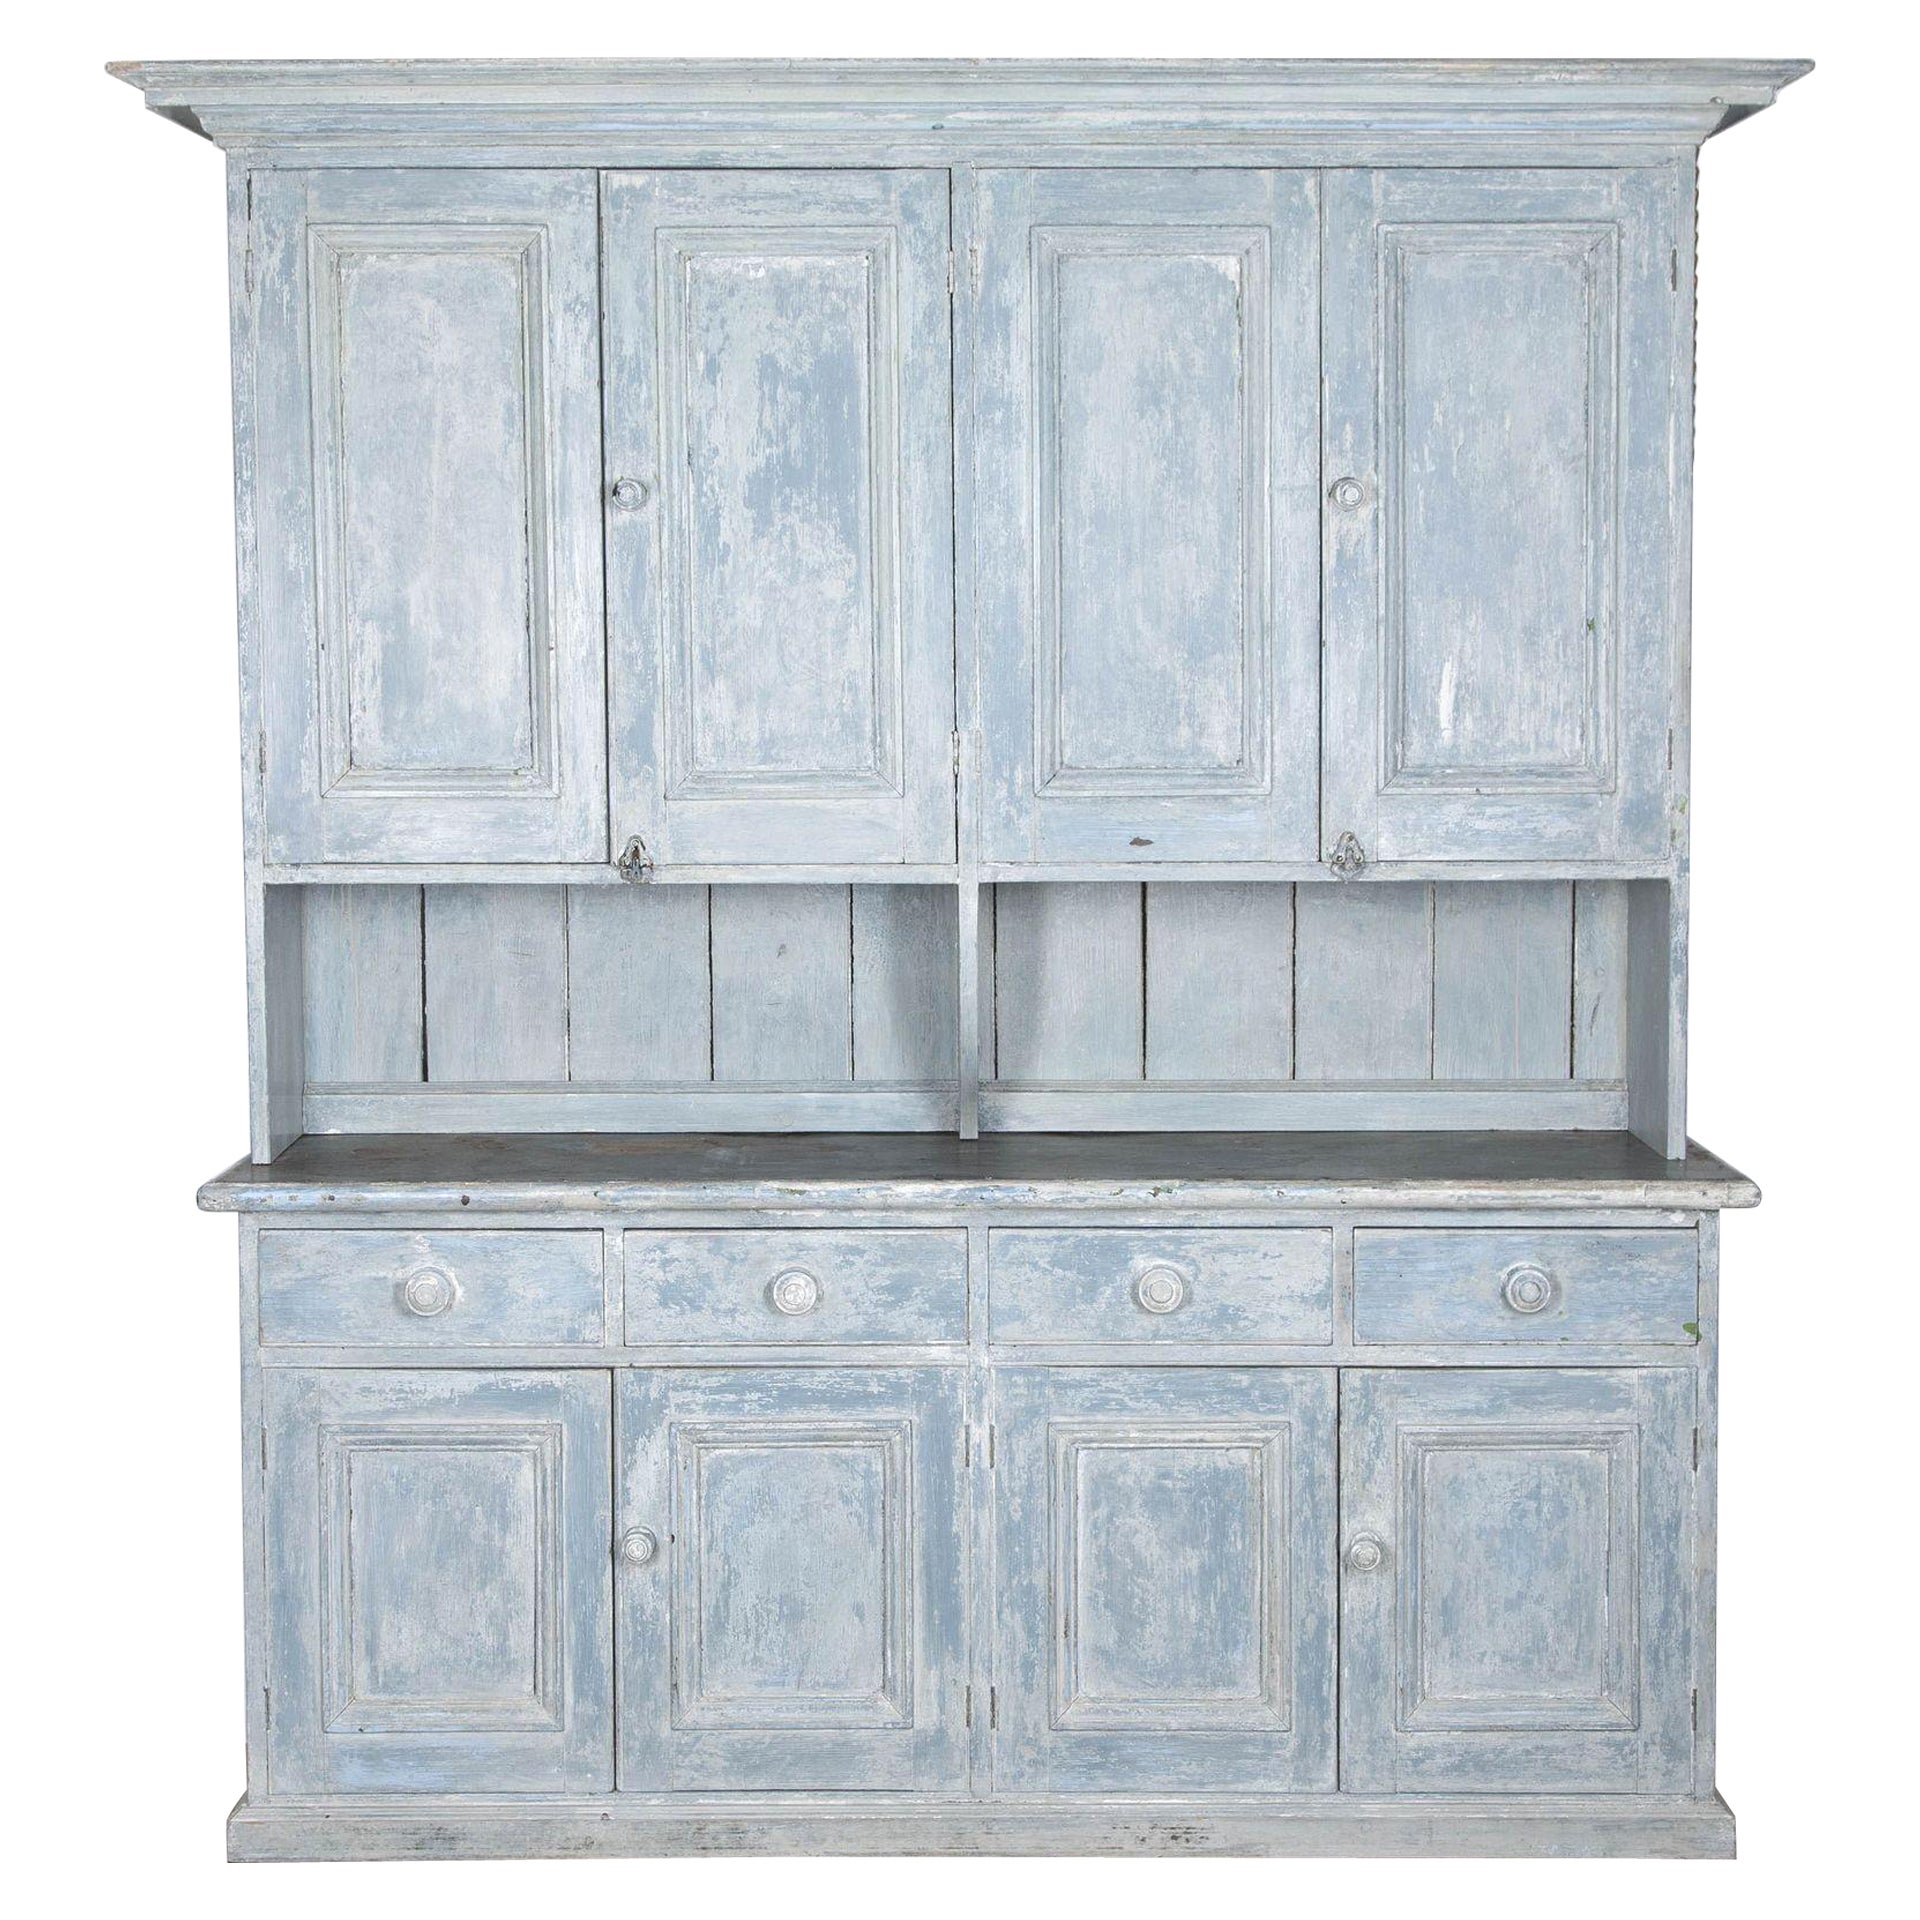 19th Century Painted Housemaids Cupboard For Sale